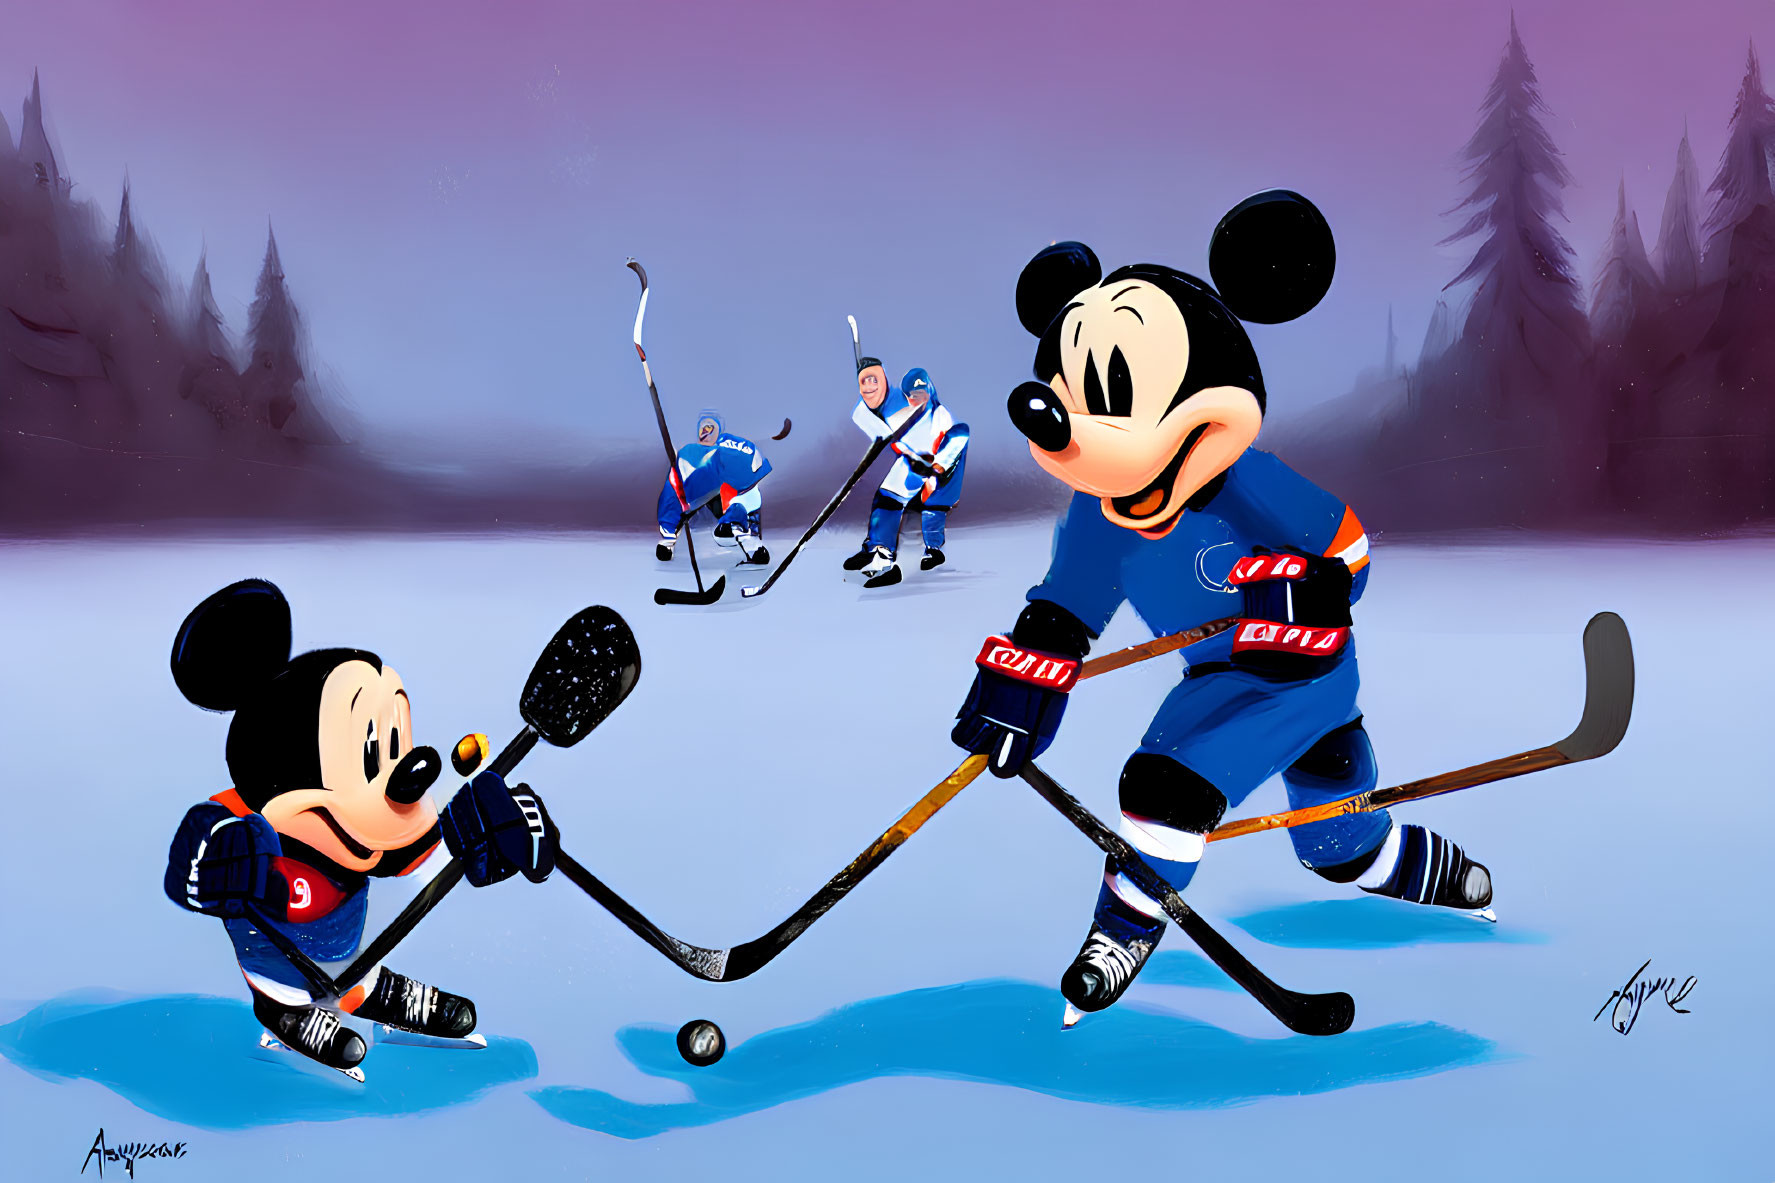 Disney character playing hockey with friends in snowy forest setting